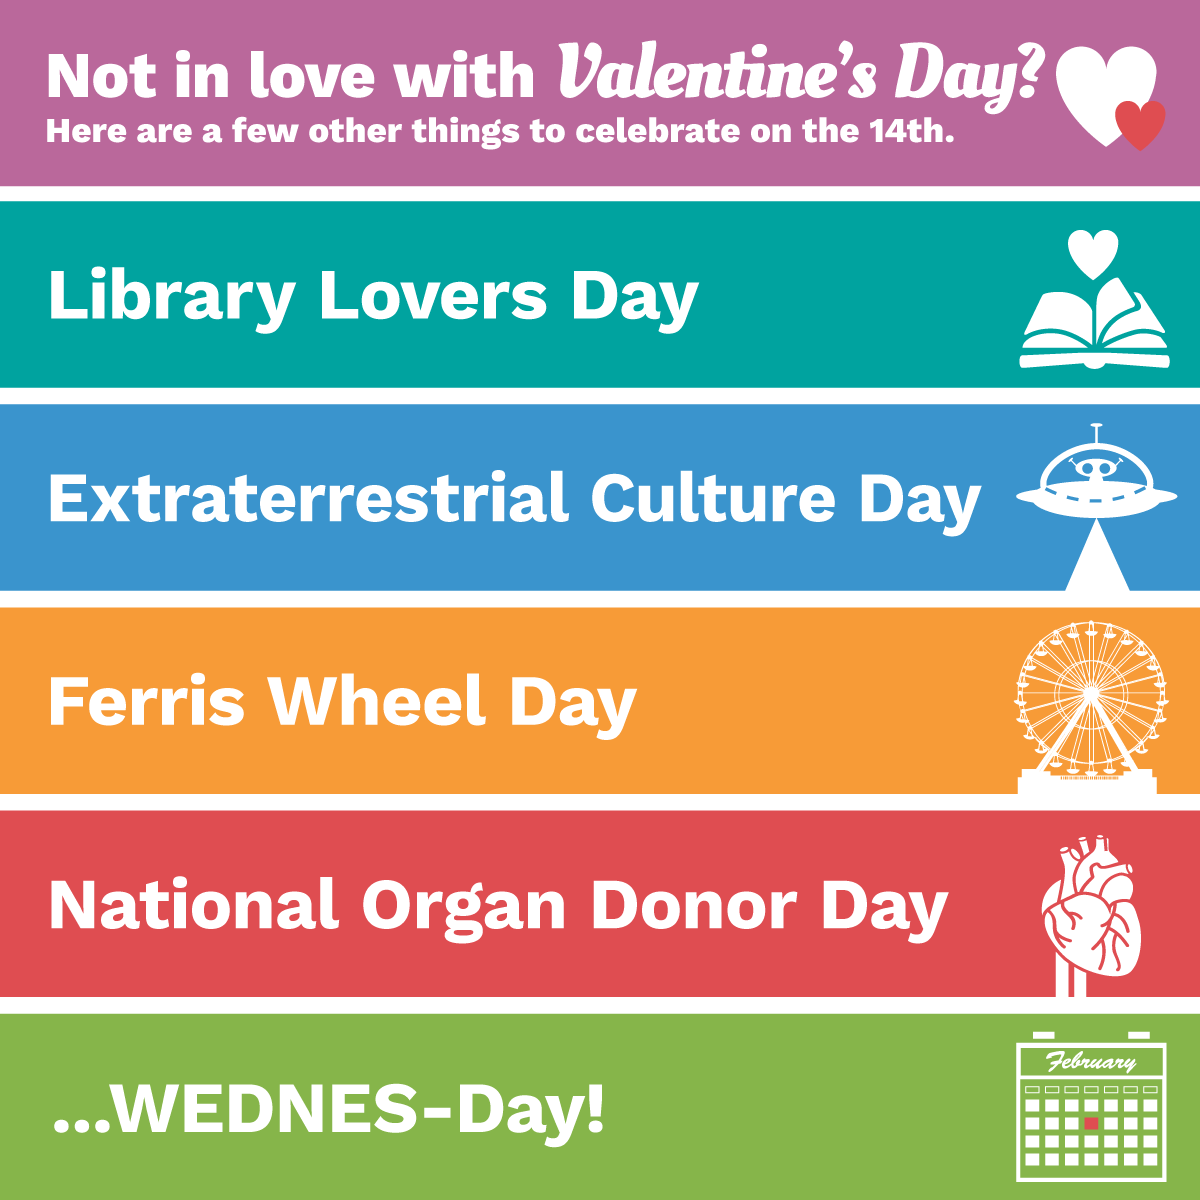 For those of you who DON’T love #ValentinesDay, here are a few other fun things to celebrate today! 💙🙃